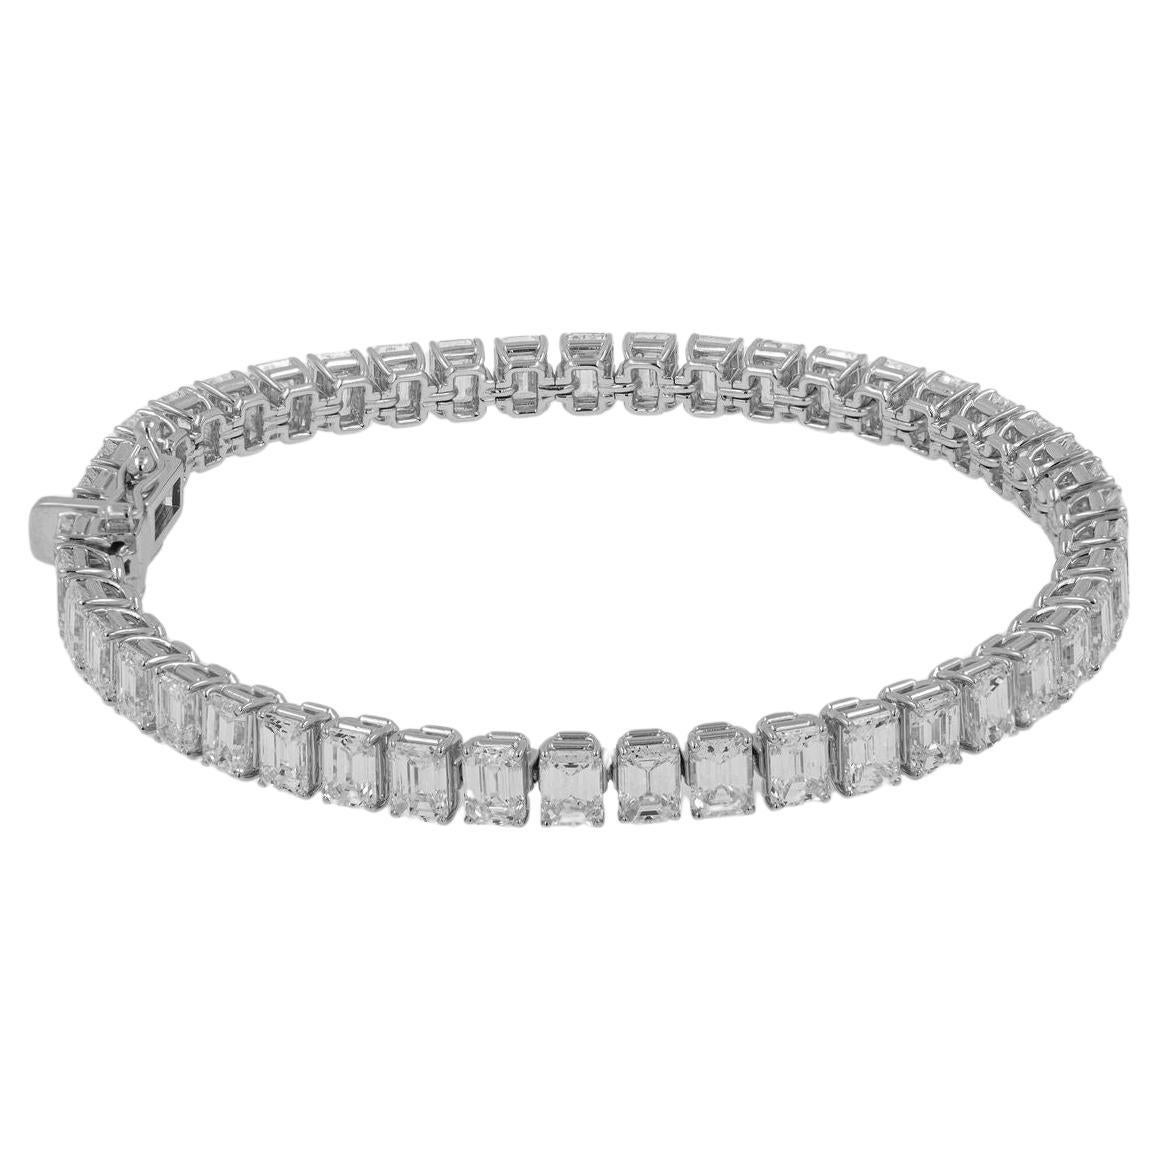 Emerald Cut 9 Carat Total Weight White Gold Diamond Bracelet For Sale